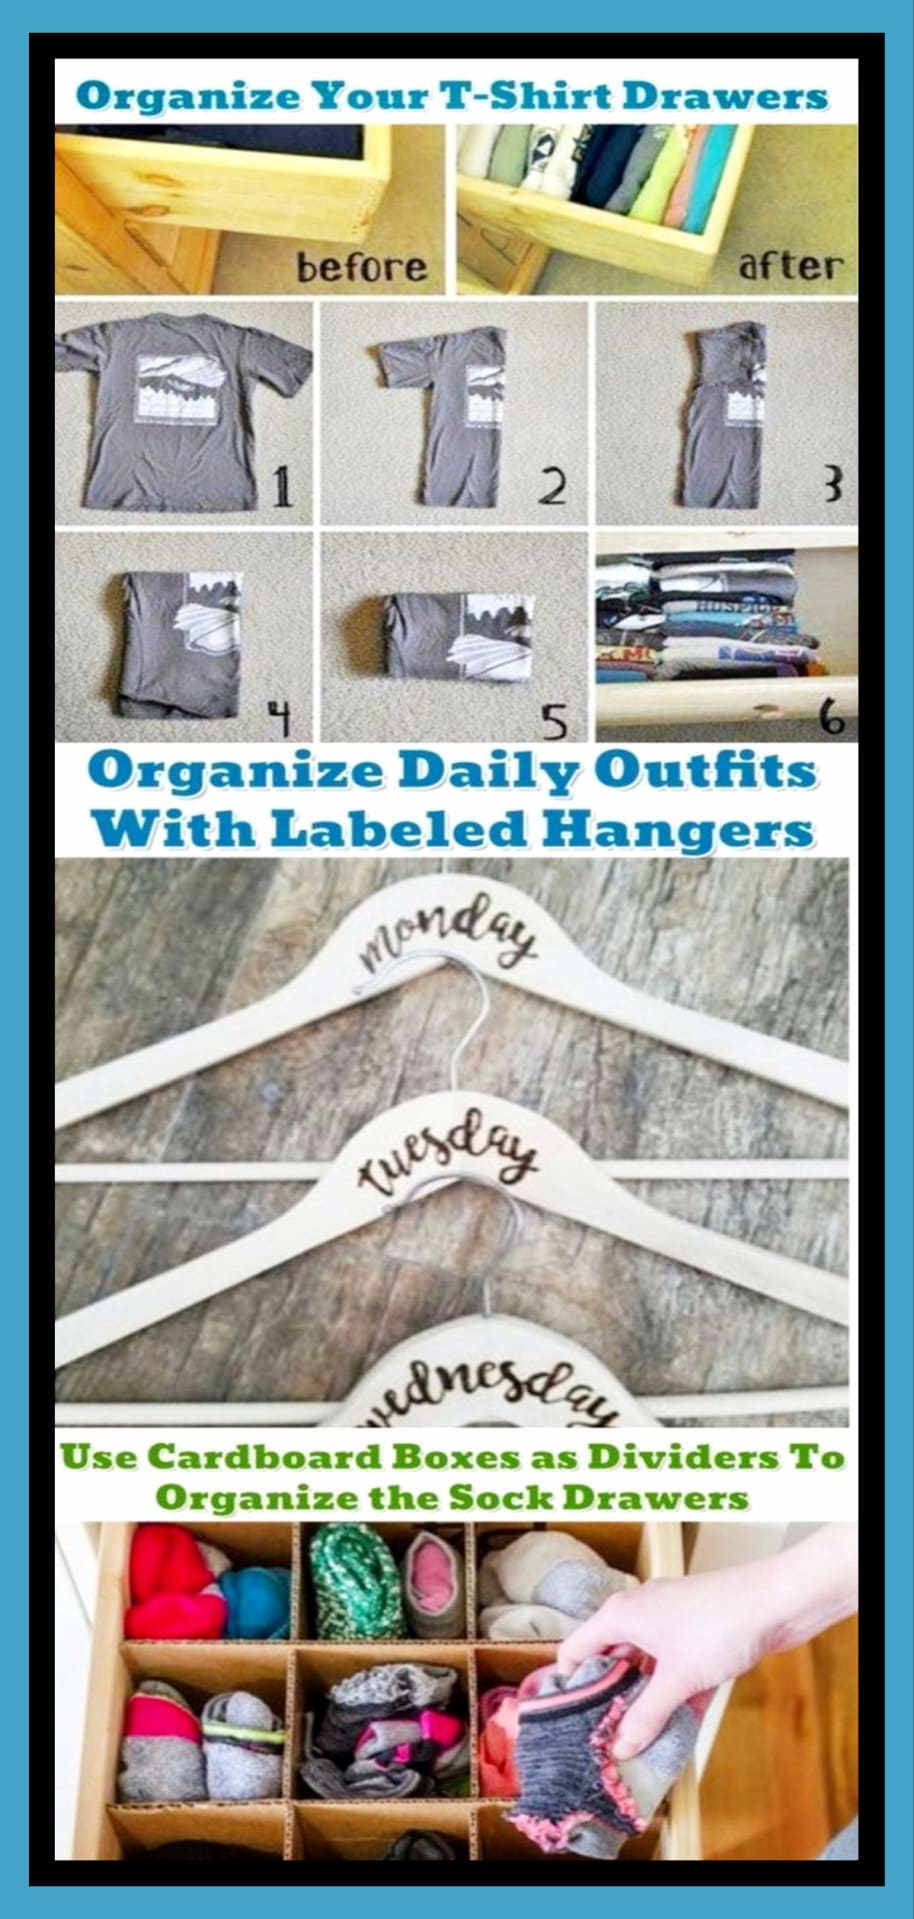 Get Organized!  Getting organized at home on a budget WITHOUT feeling overwhelmed by clutter